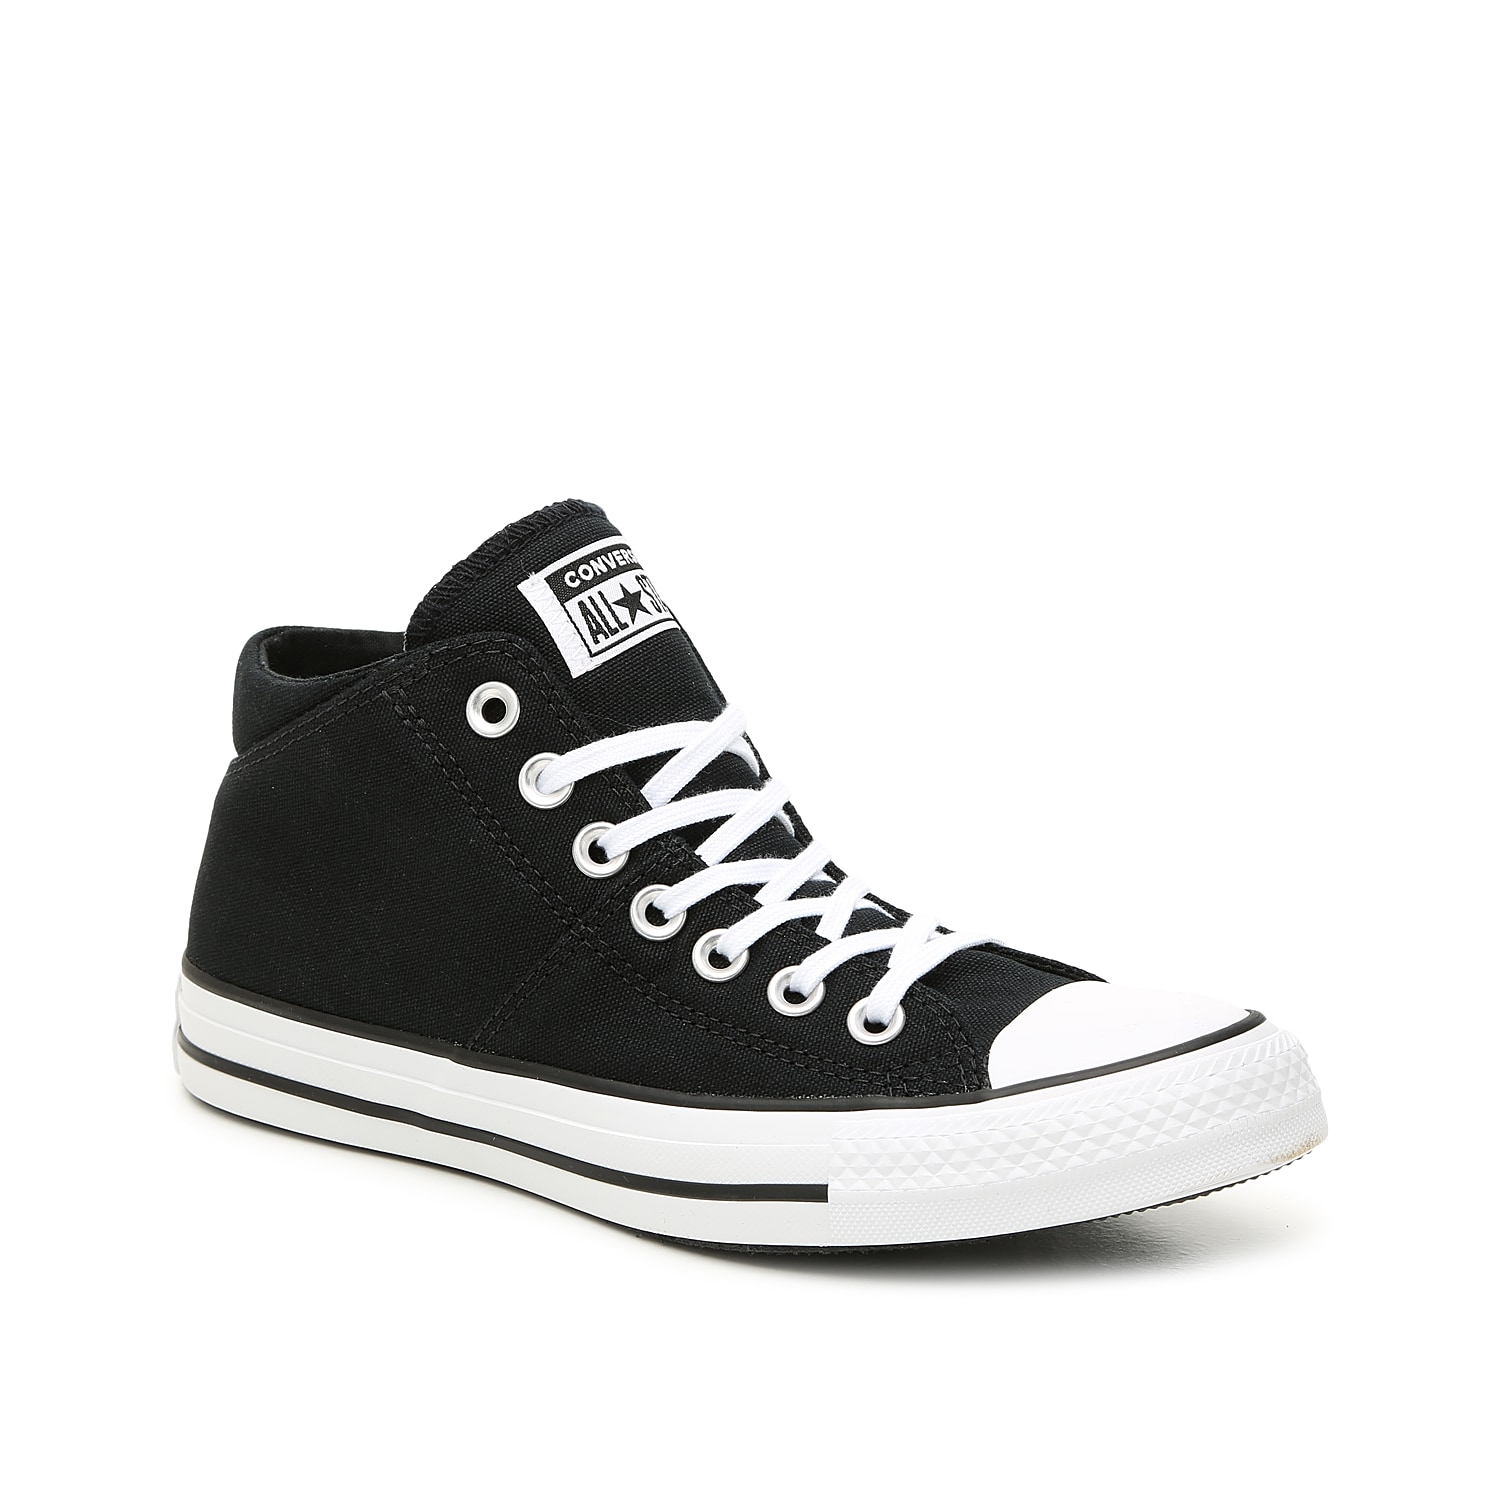 Converse Chuck Taylor All Star Madison MidTop Sneaker | Women's | Black | Size Women's 10 / Men's 8 | Athletic | Sneakers | High Top